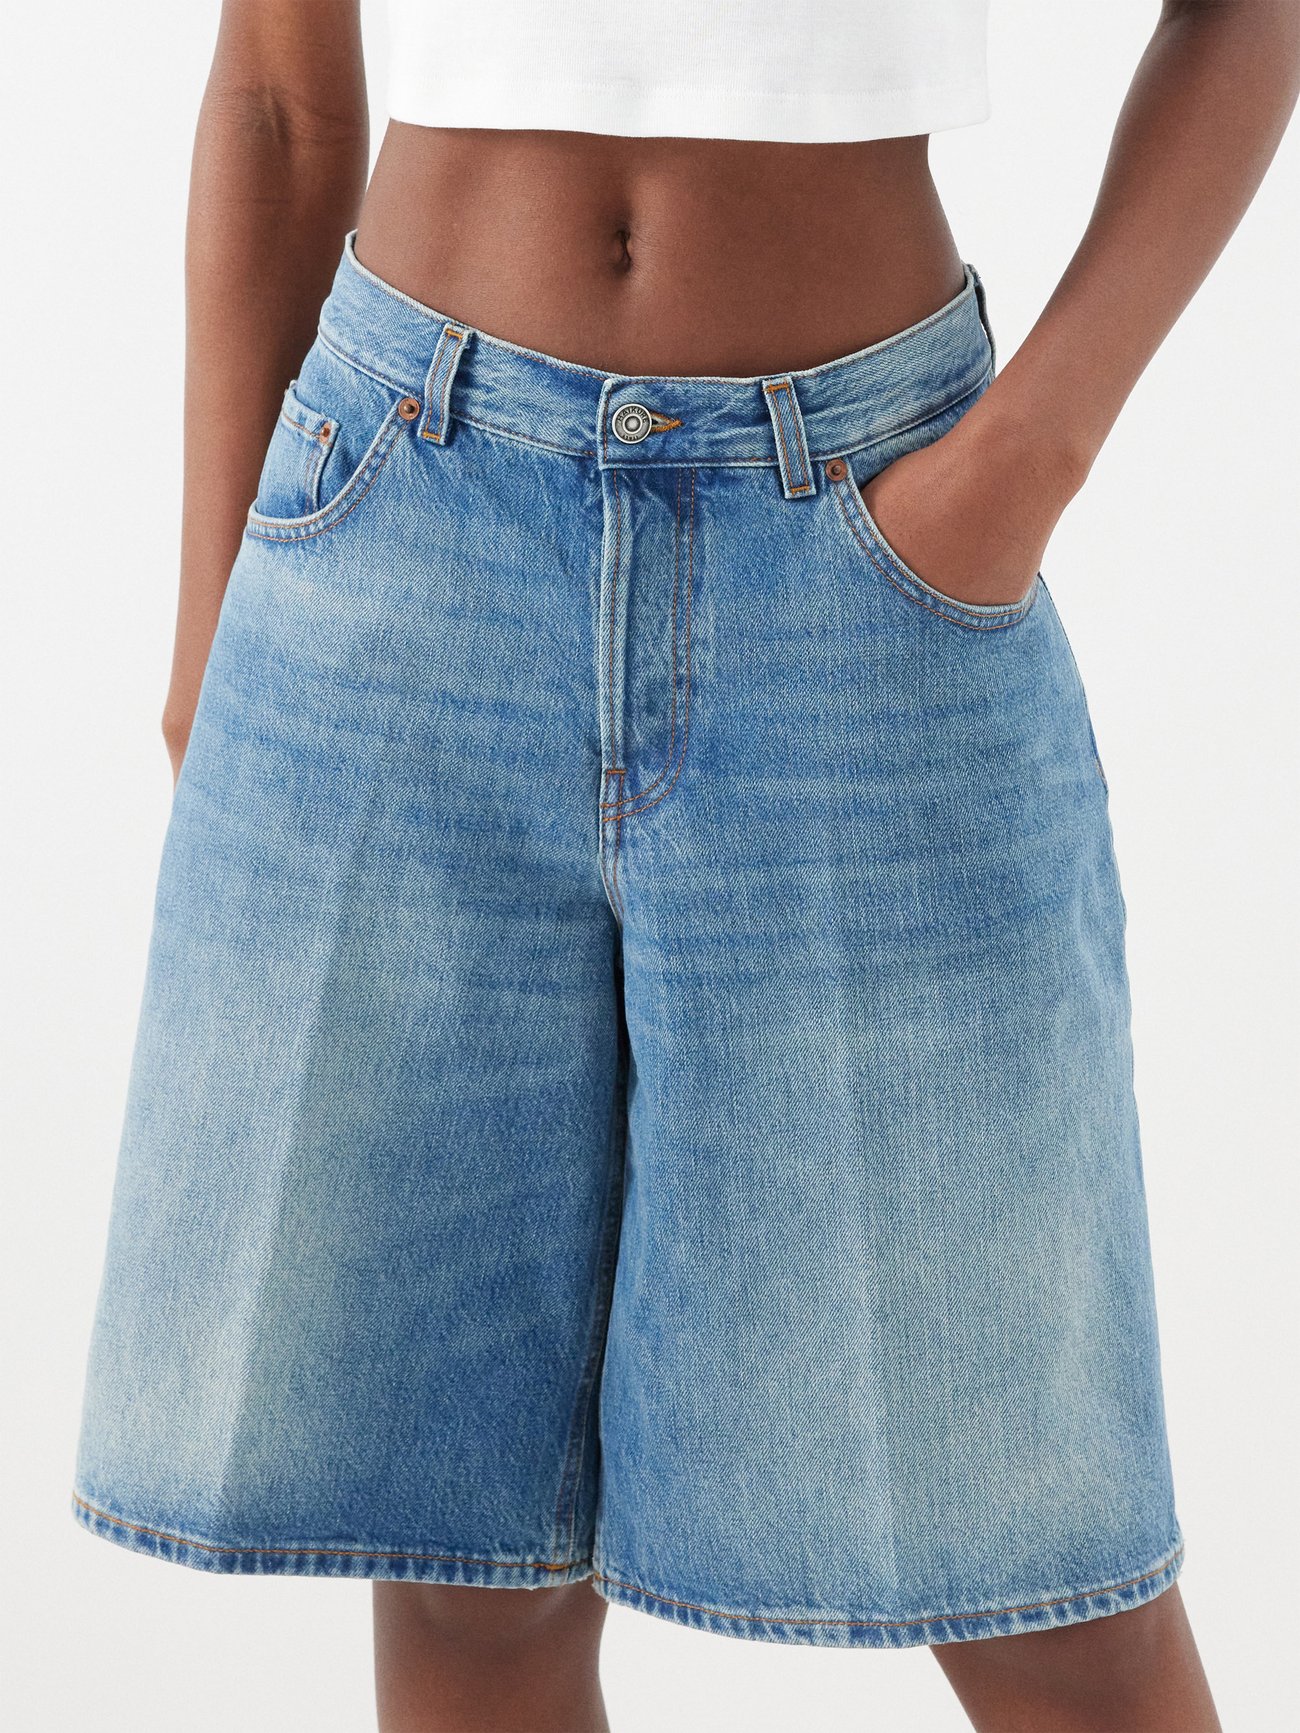 jorts trend 2024 - Haikure’s elevated take on the Bermuda shorts, this blue high-rise Becky pair are crafted in cotton denim and stamped with a leather logo patch.